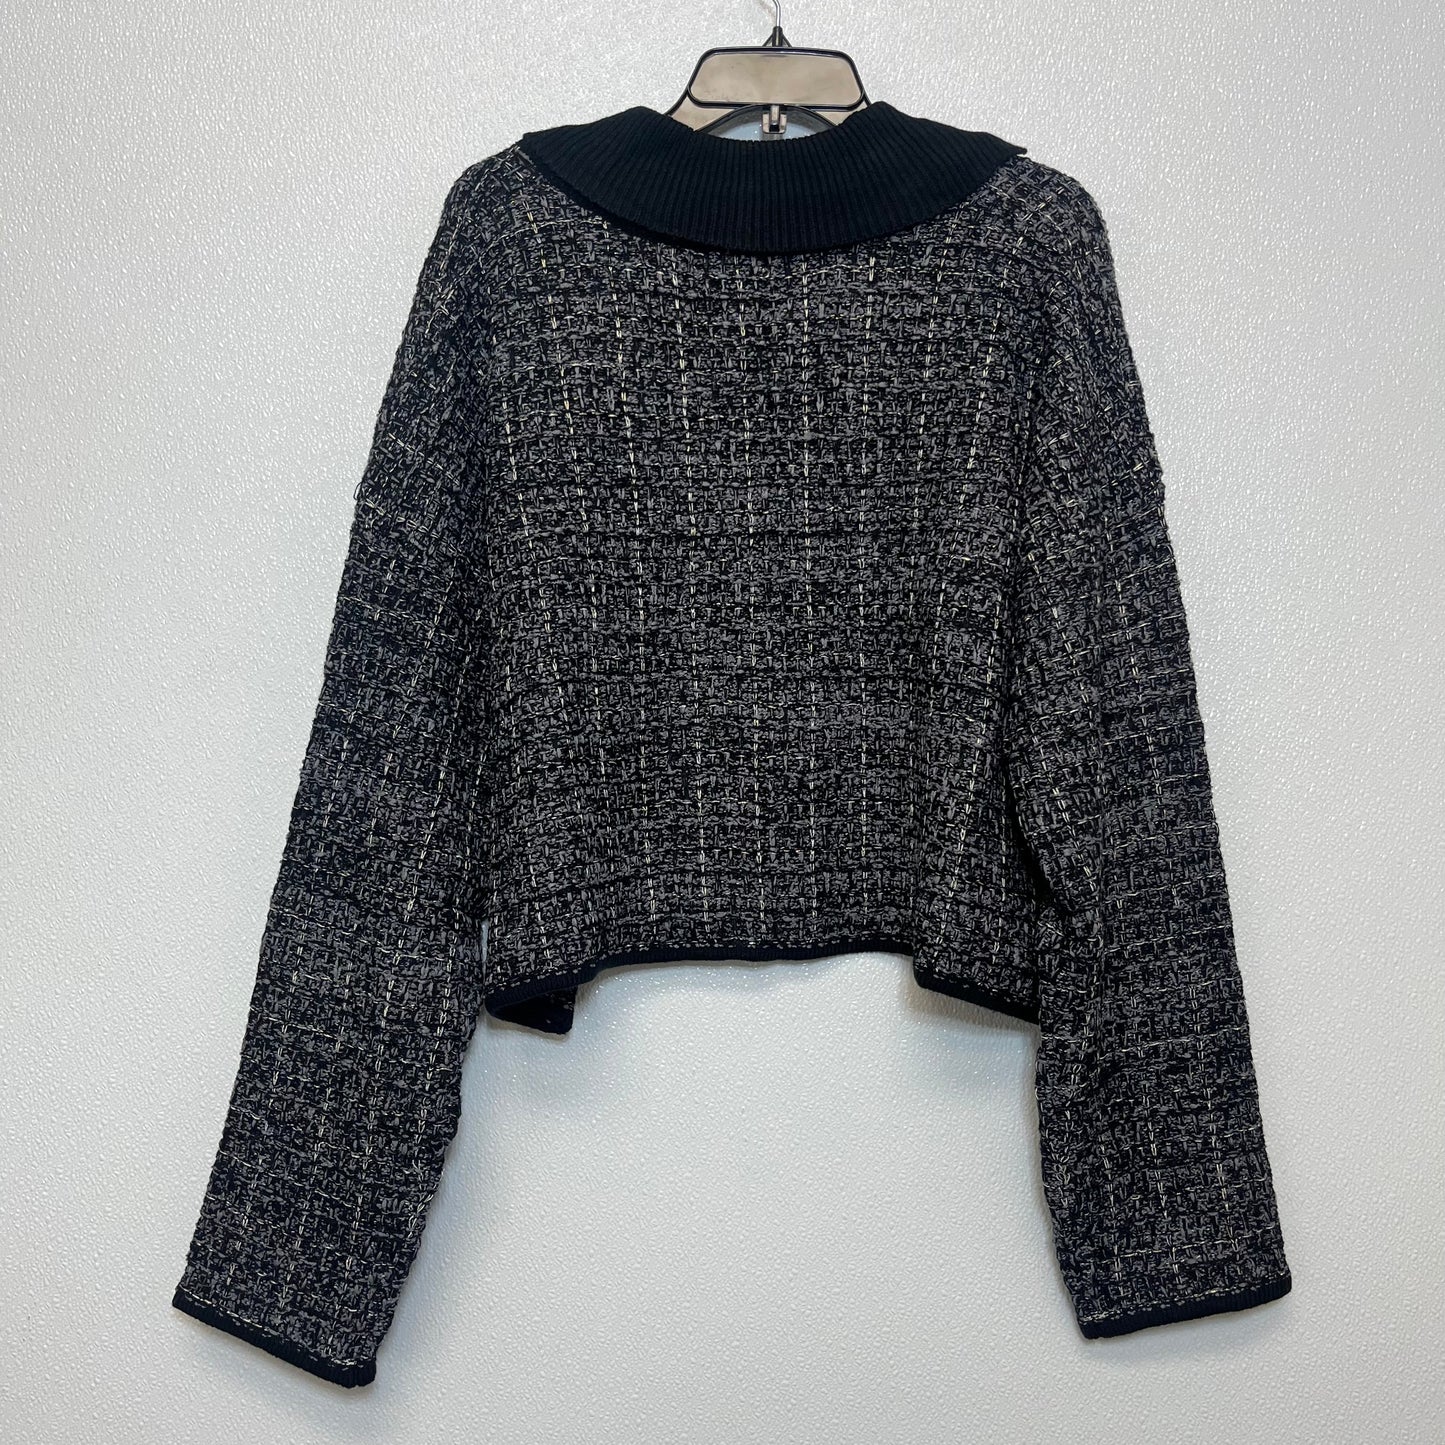 Cardigan By New York And Co  Size: Xxl